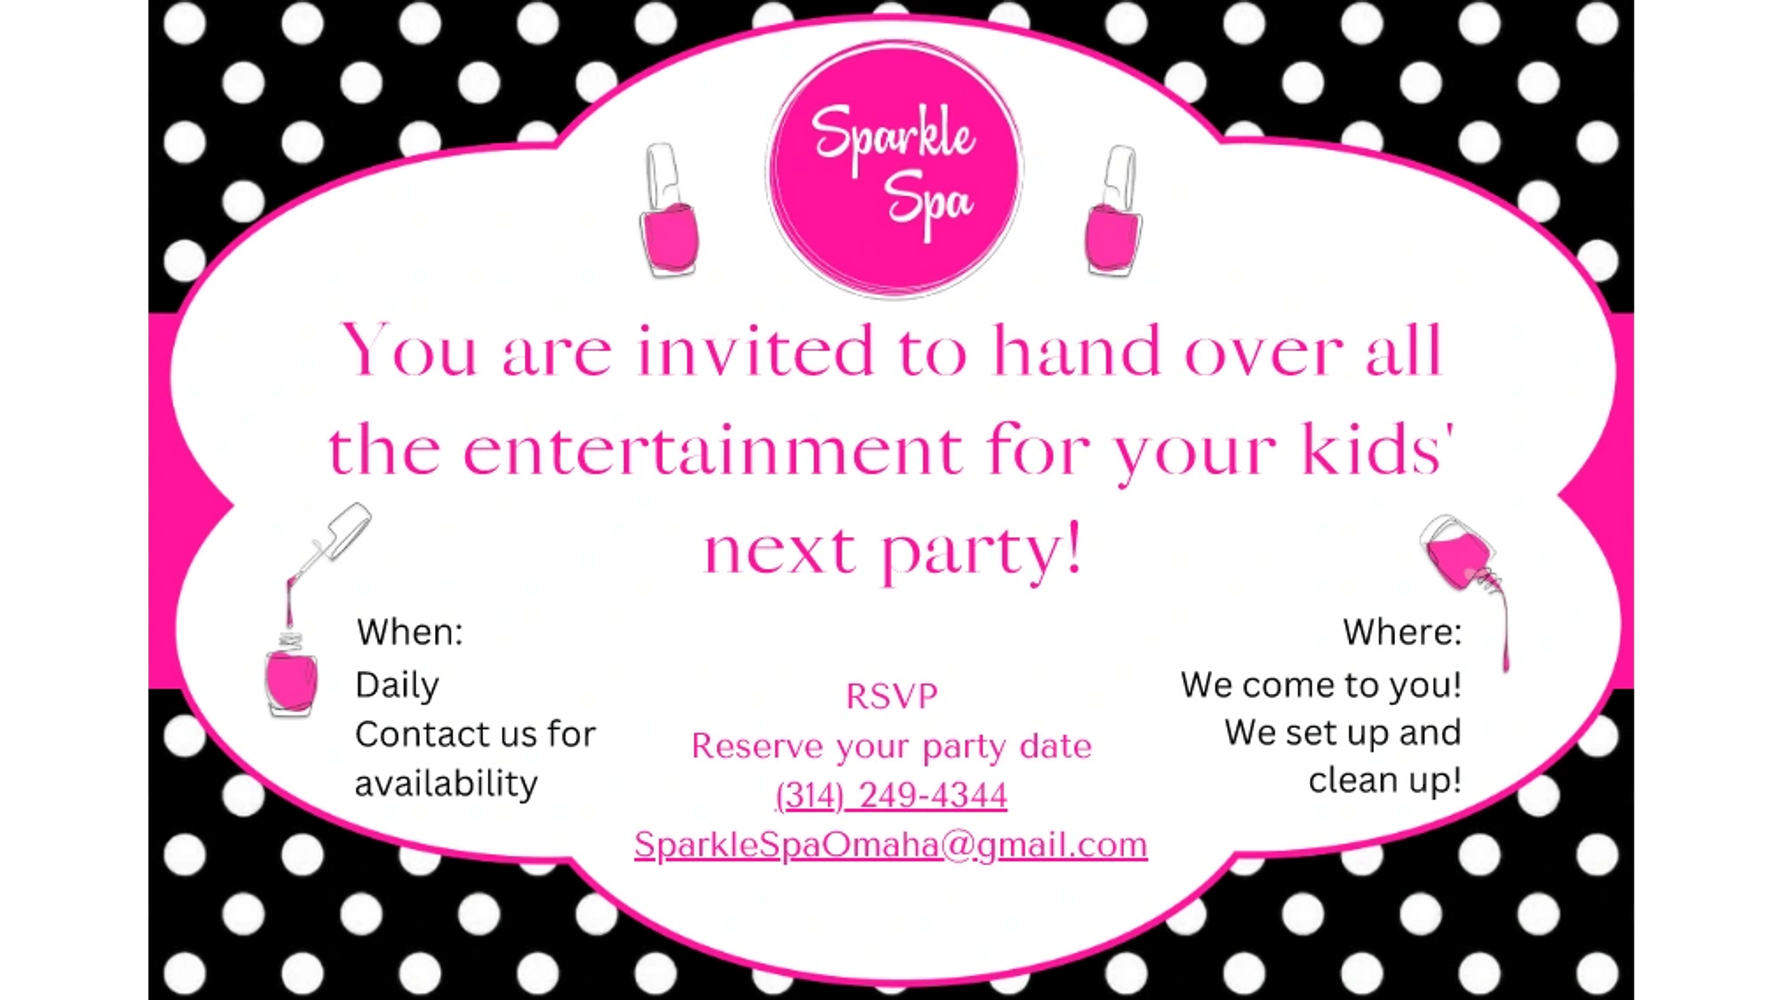 Sample Sparkle Spa invitation that reads: You are invited to hand over all the entertainment for you